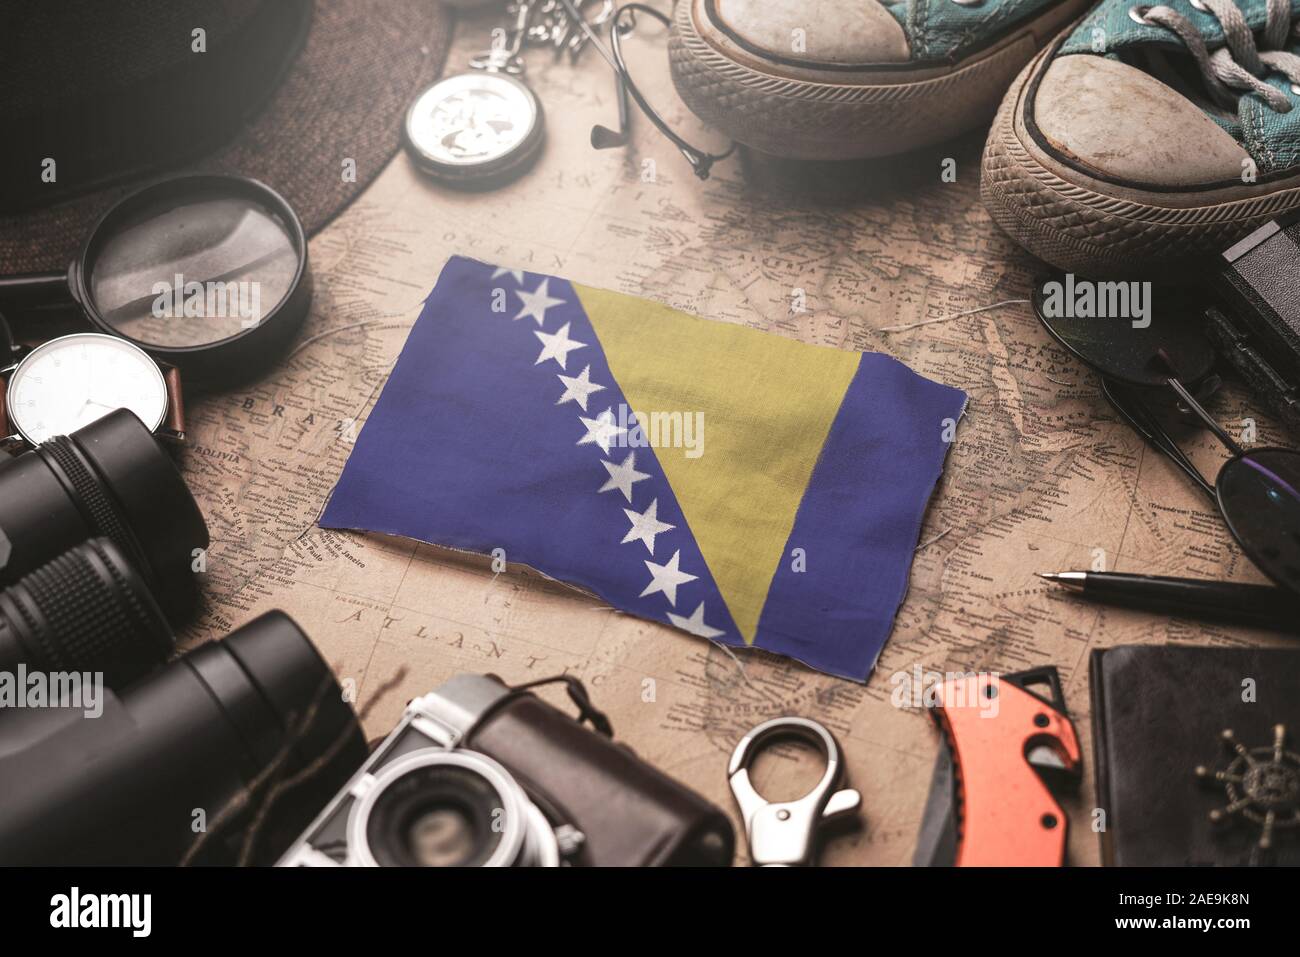 Bosnia and Herzegovina Flag Between Traveler's Accessories on Old Vintage Map. Tourist Destination Concept. Stock Photo